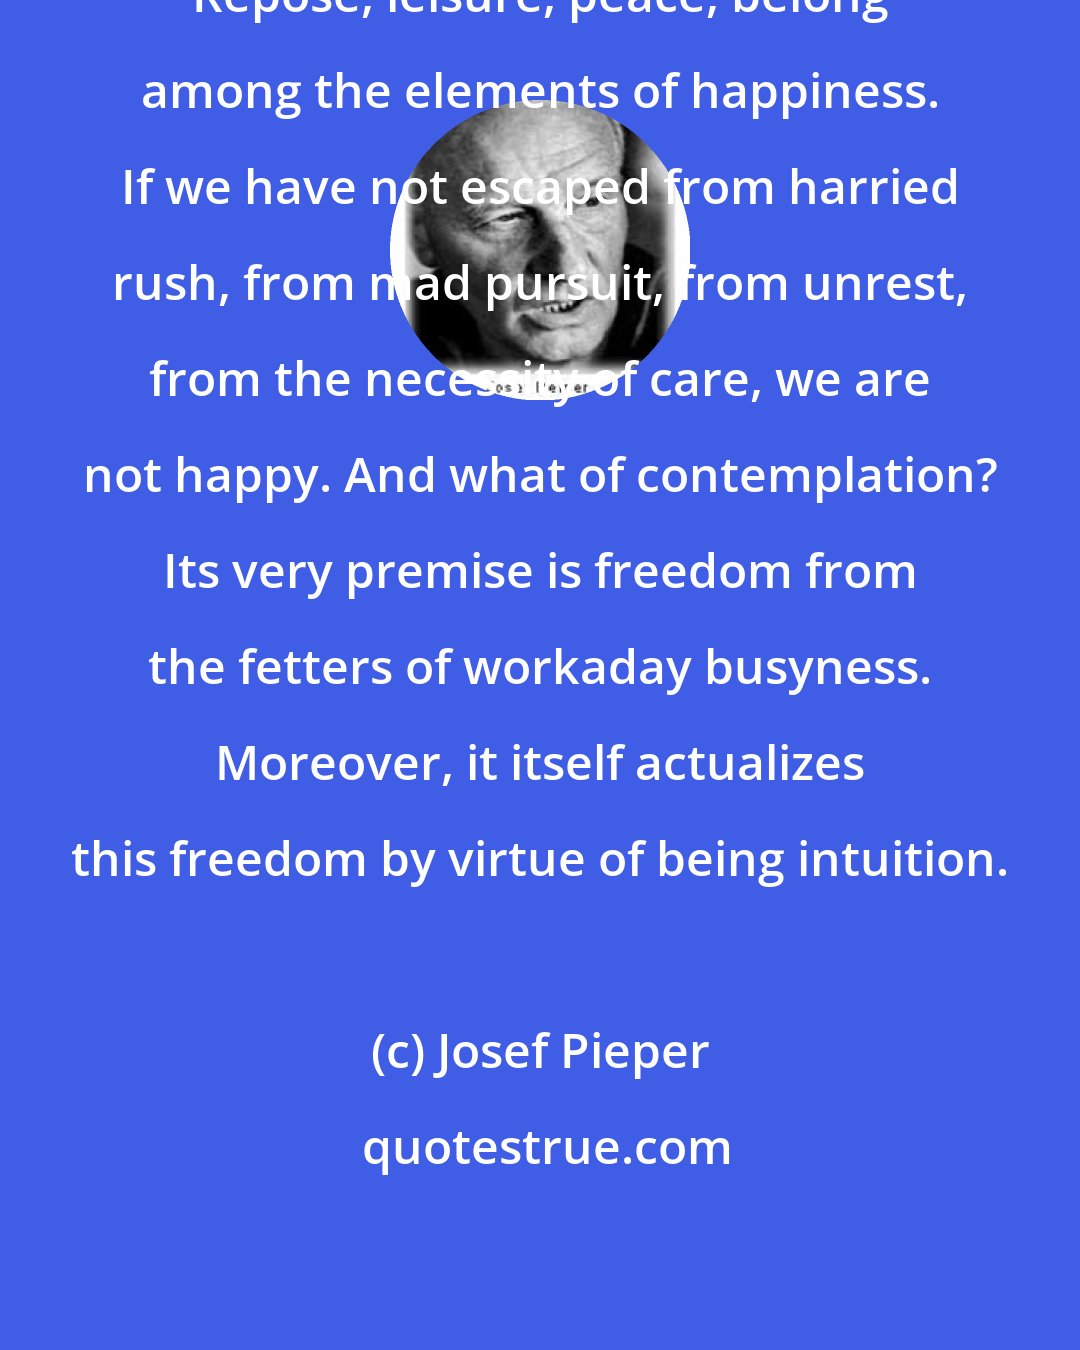 Josef Pieper: Repose, leisure, peace, belong among the elements of happiness. If we have not escaped from harried rush, from mad pursuit, from unrest, from the necessity of care, we are not happy. And what of contemplation? Its very premise is freedom from the fetters of workaday busyness. Moreover, it itself actualizes this freedom by virtue of being intuition.